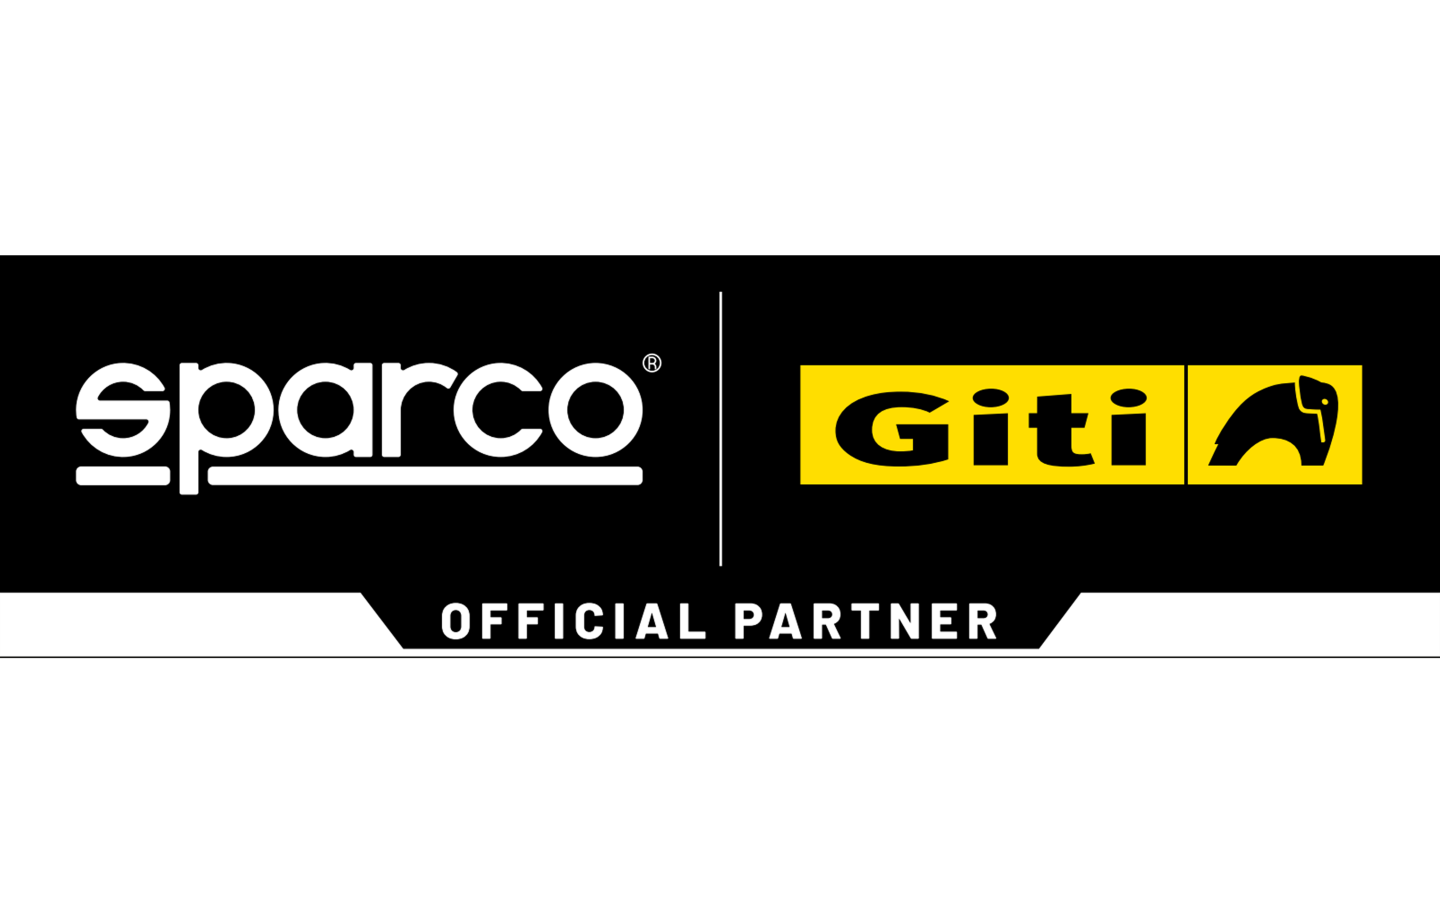 Giti – powered by Sparco® - A Multi-Year Global Collaboration